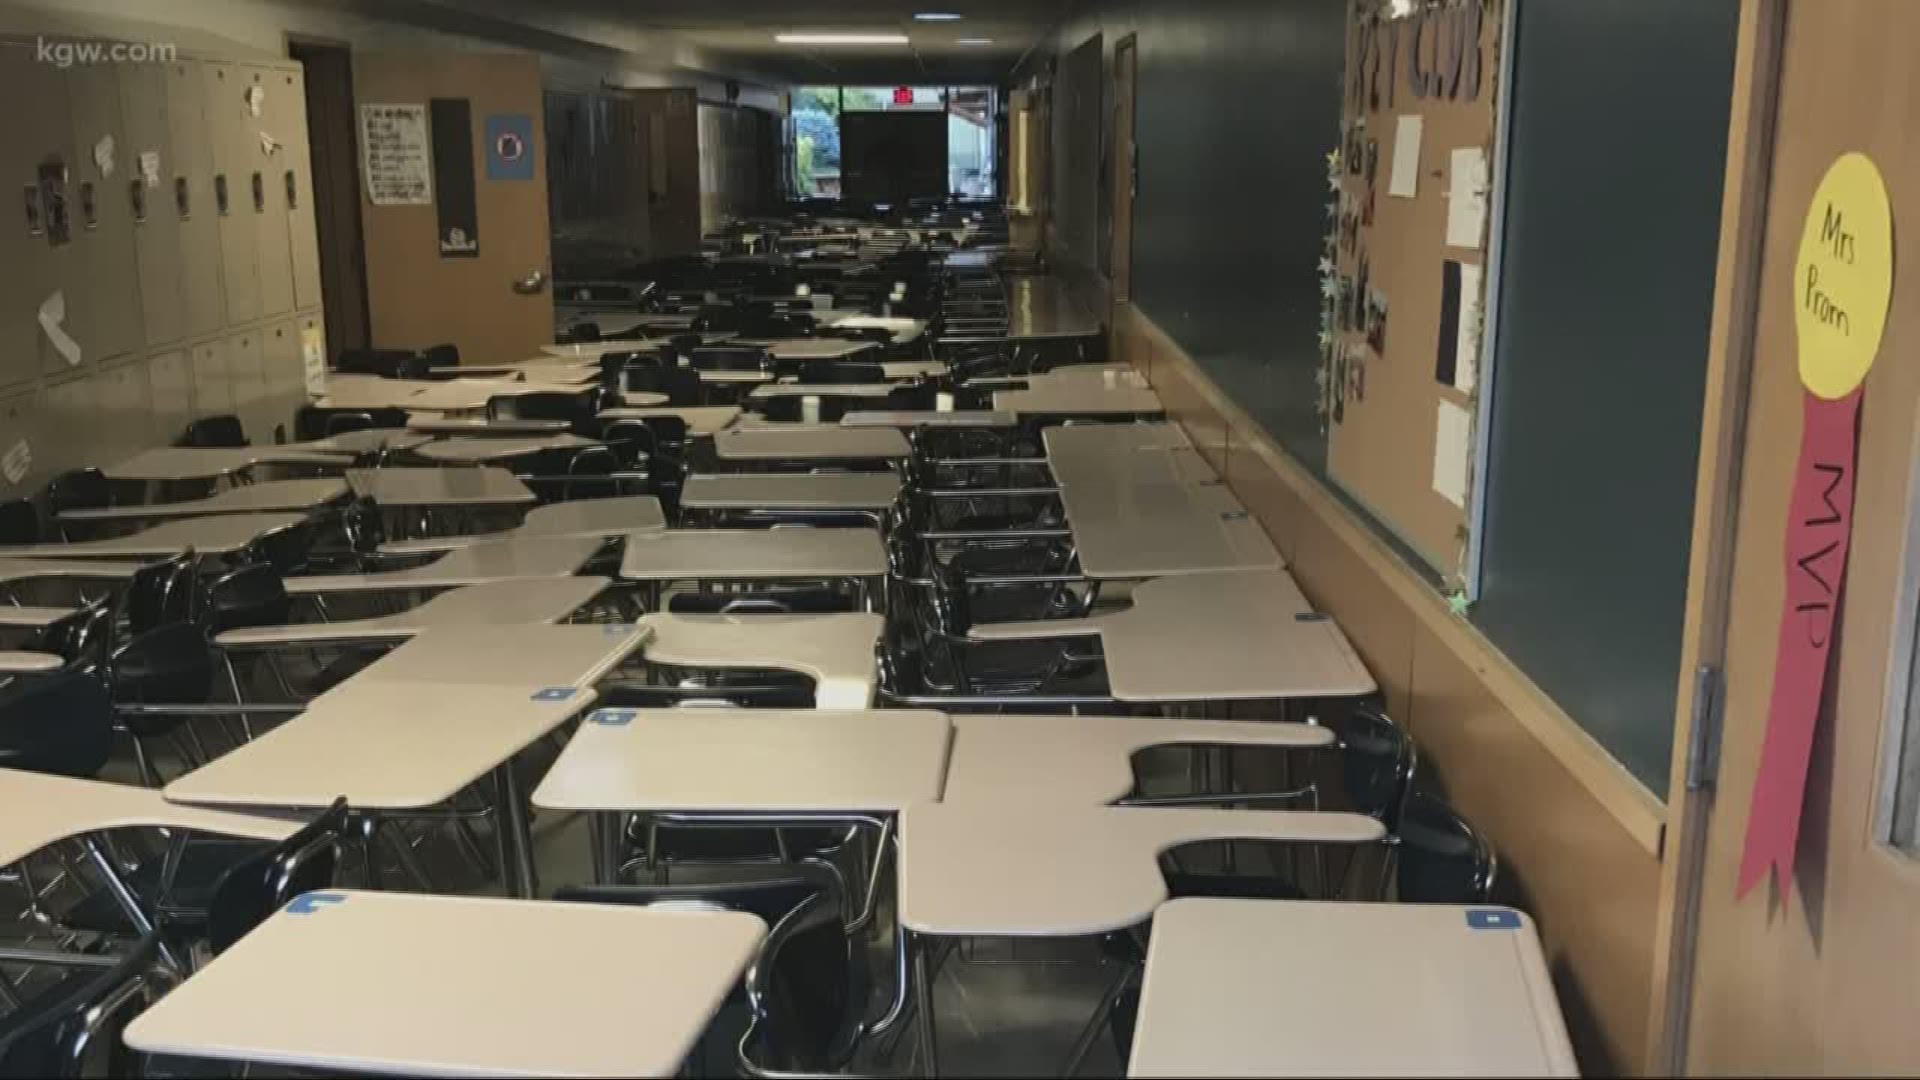 A senior prank by students at Gladstone High School has drawn the ire of the school’s principal.